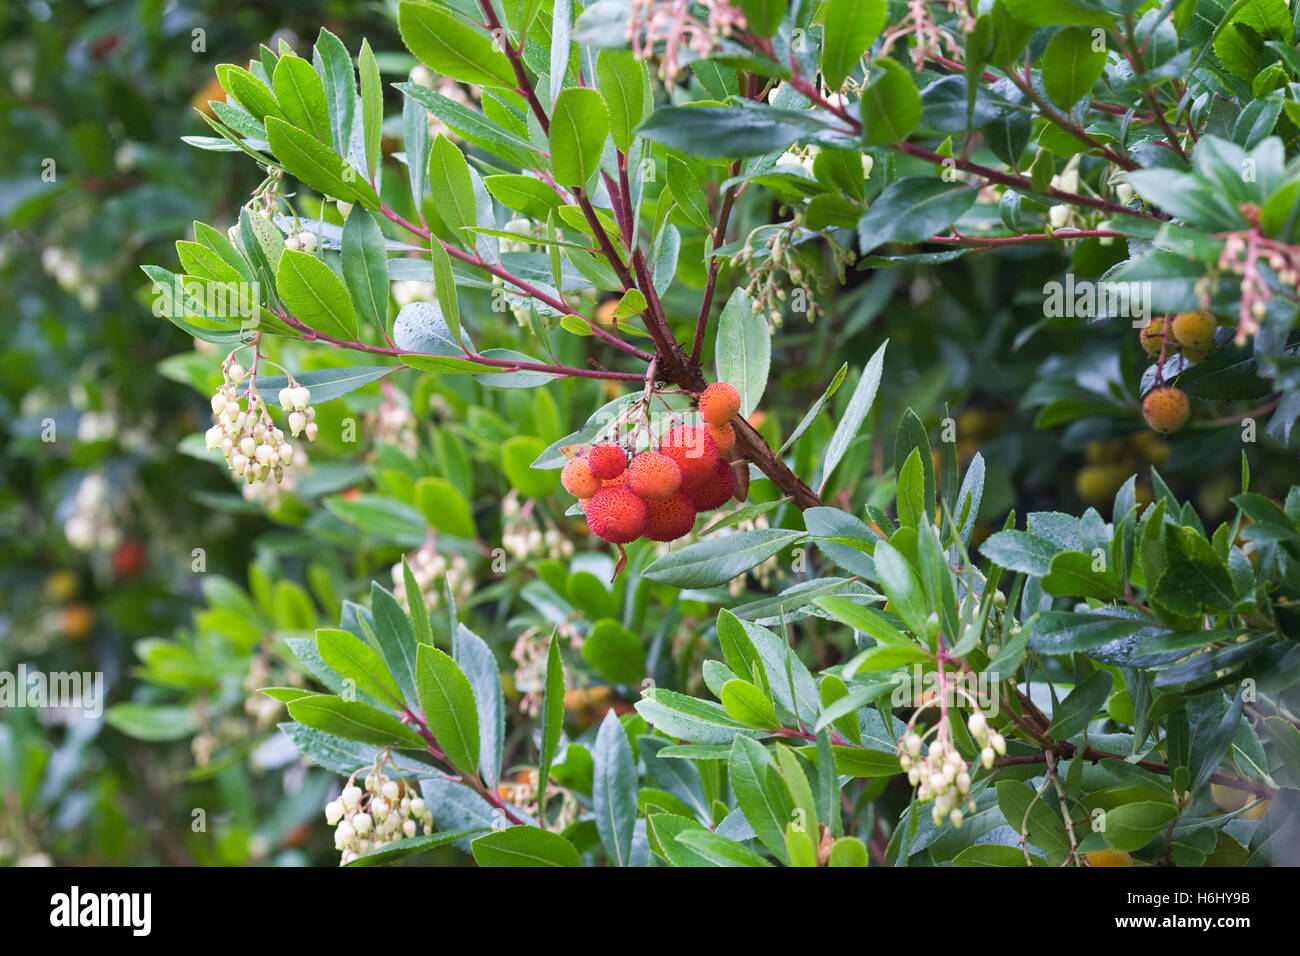 Arbutus unedo. Flowers and fruit of the Strawberry tree. Stock Photo